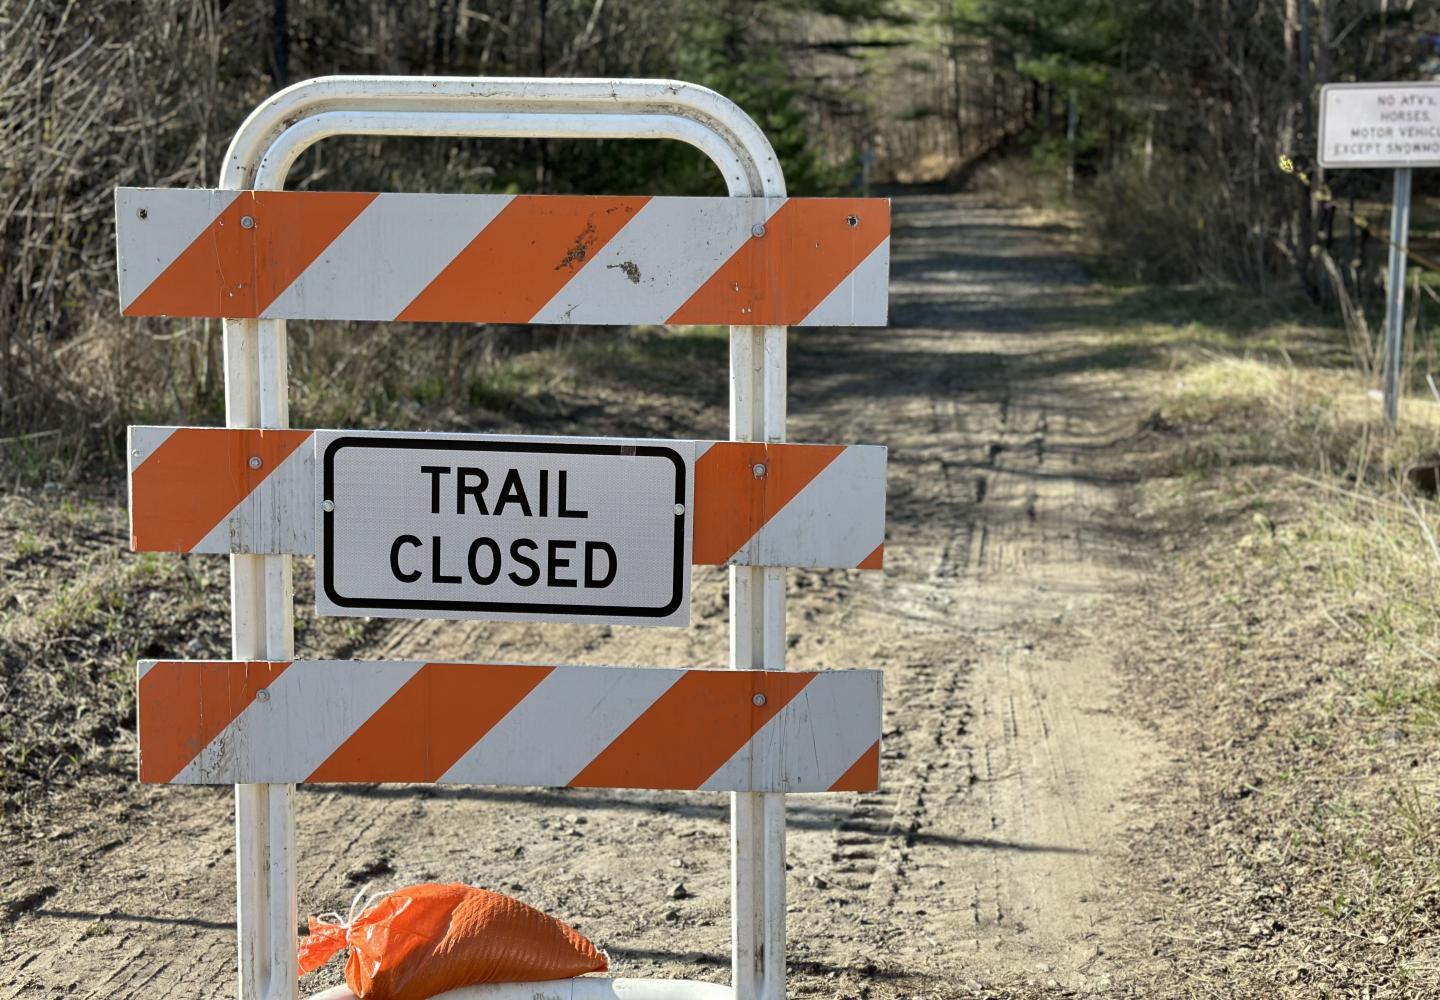 The Adirondack Rail Trail between Lake Placid and Saranac Lake will be closed for the summer for construction